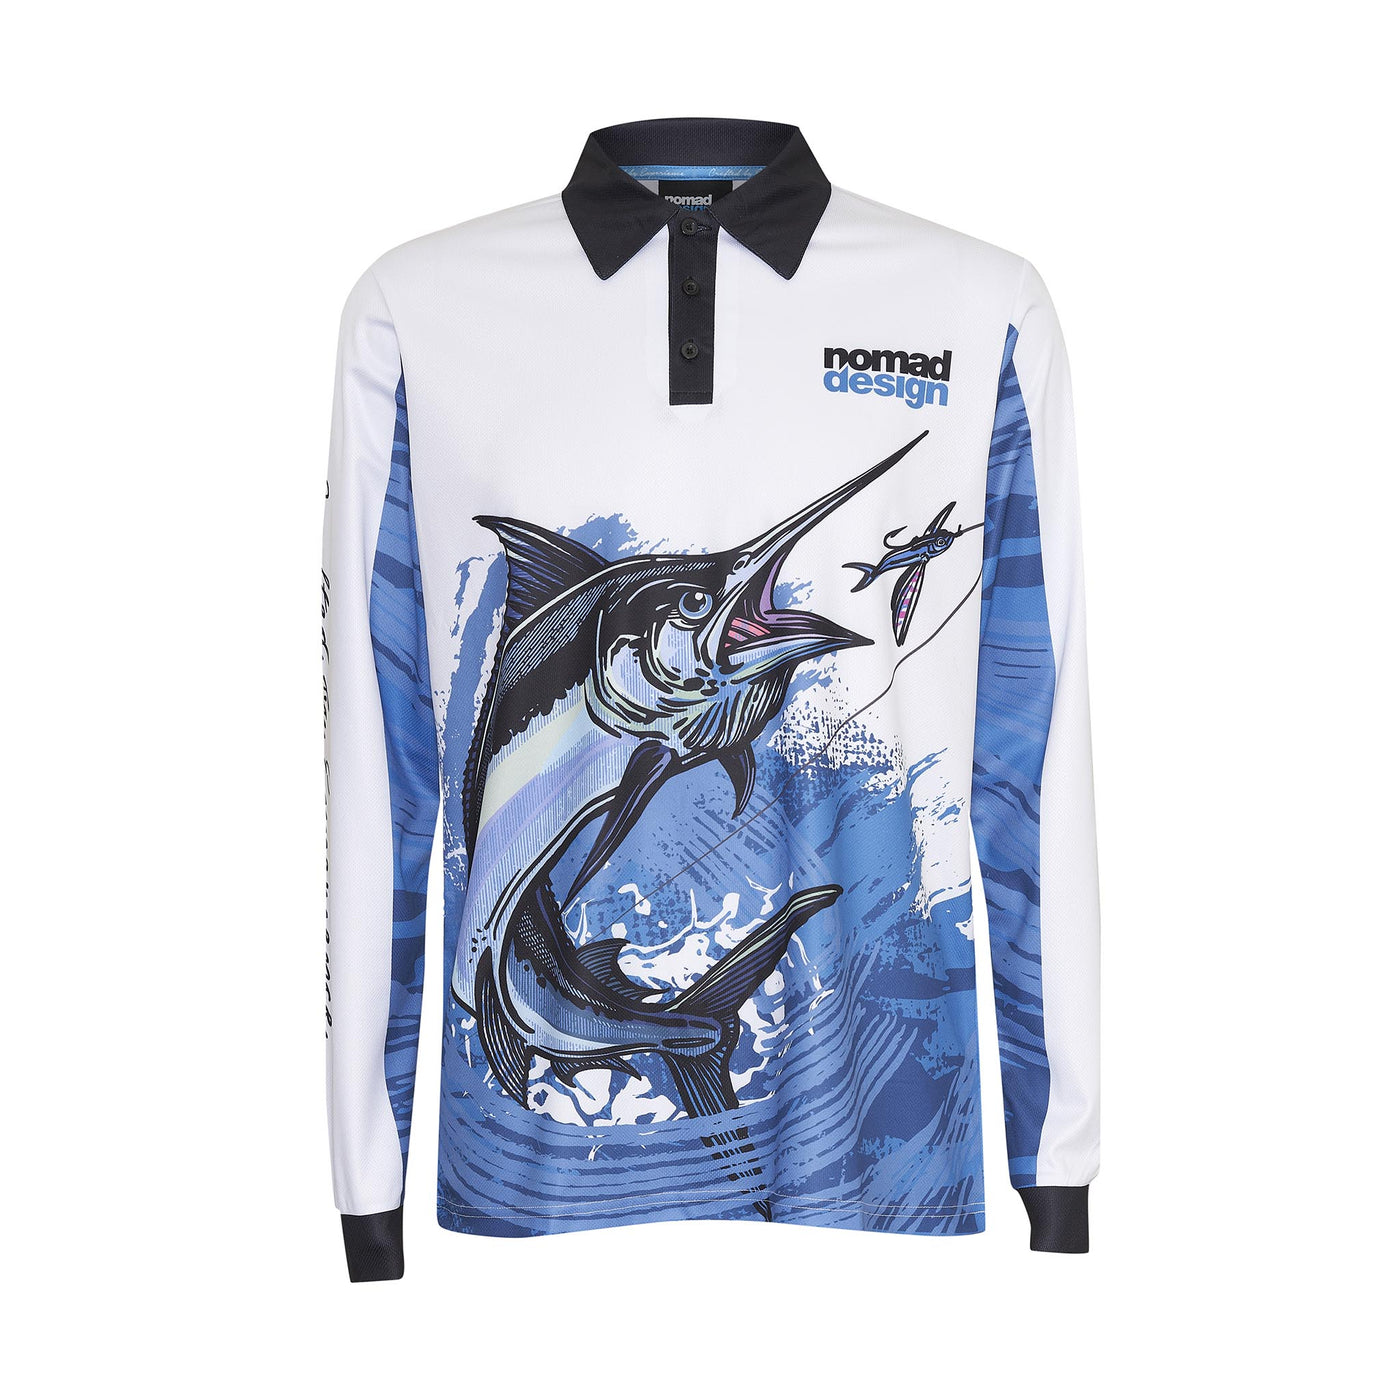 Tech Fishing Shirt Collared - Mighty Marlin – Nomad-Design